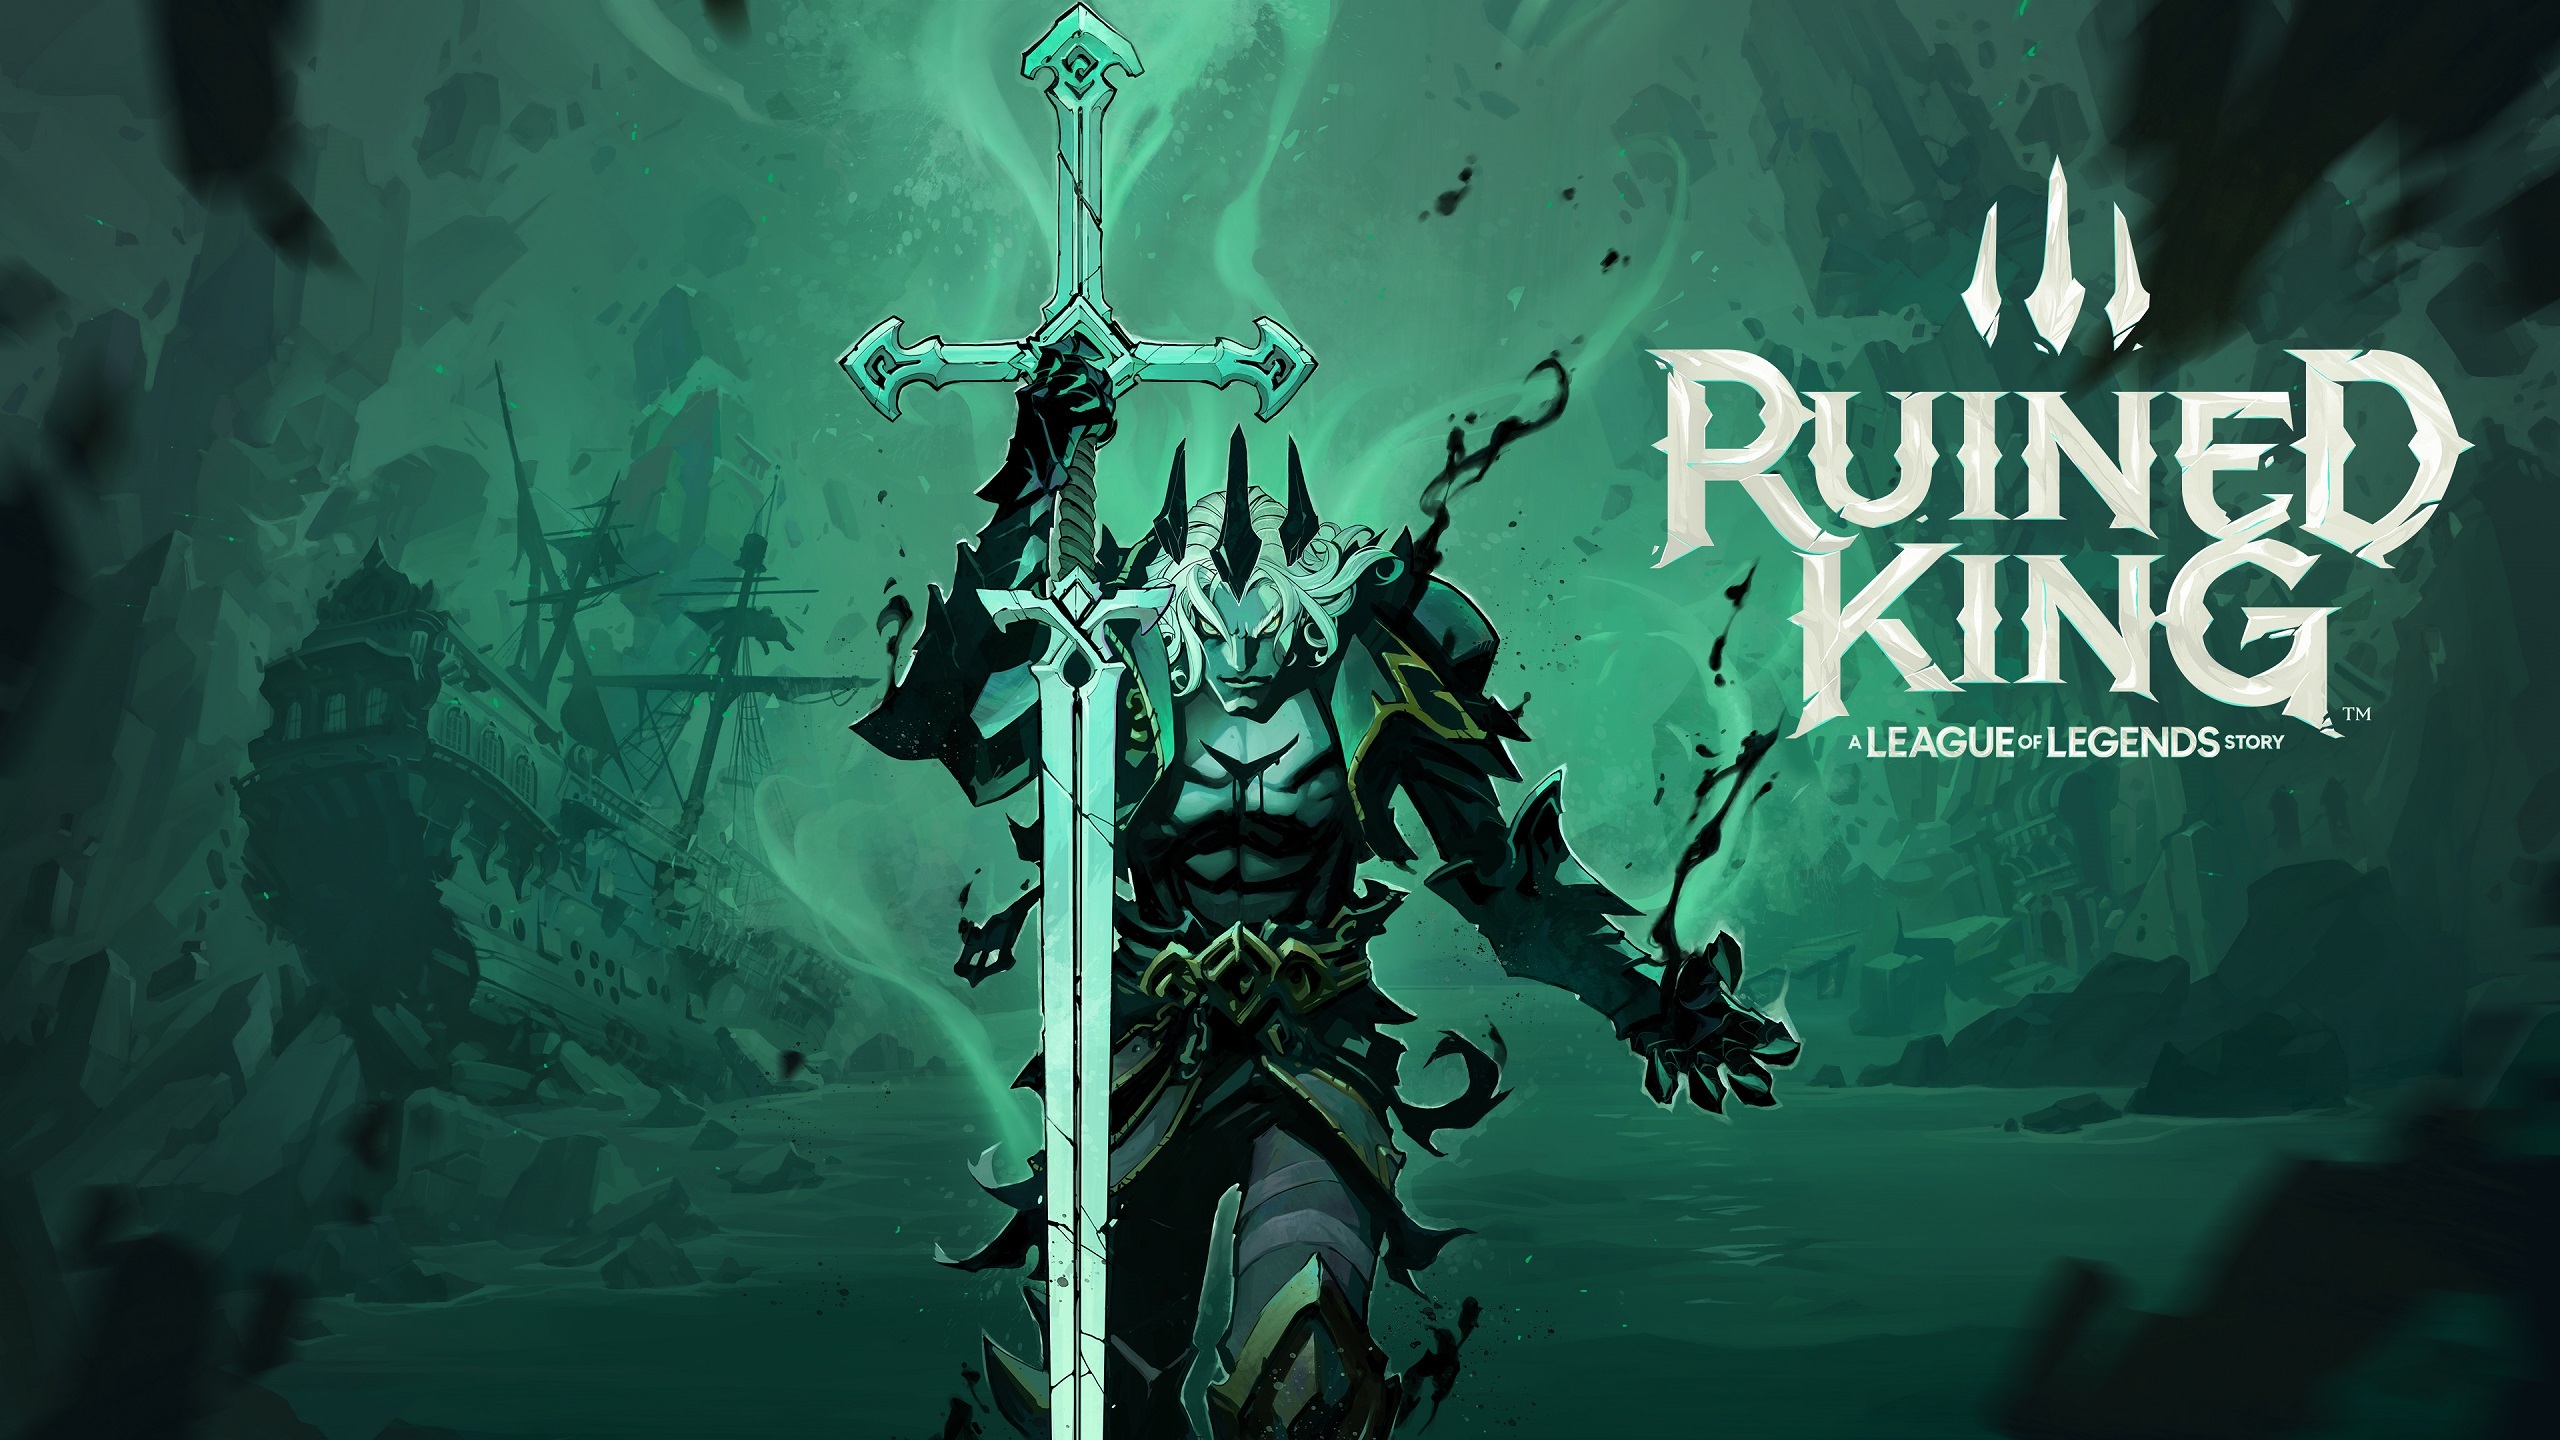 10+ Ruined King A League Of Legends Story HD Wallpapers and Backgrounds